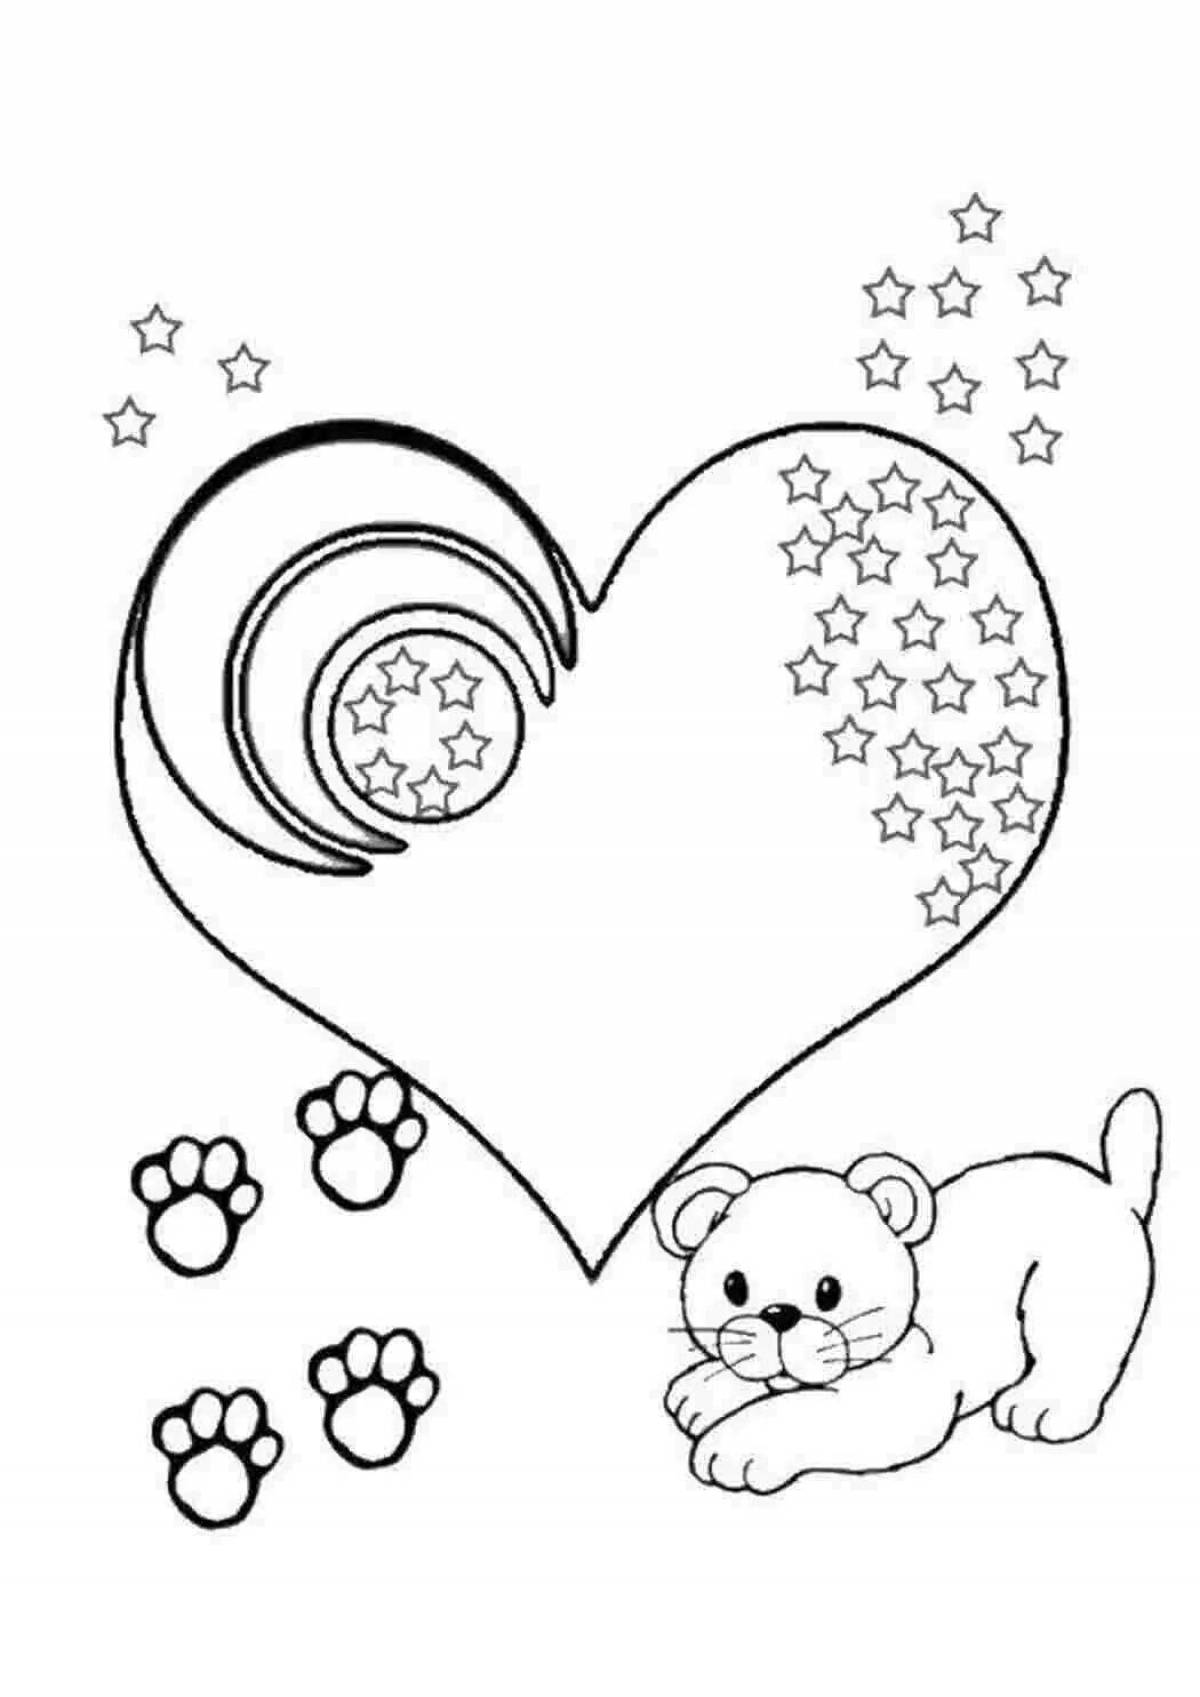 Coloring book funny rainbow heart